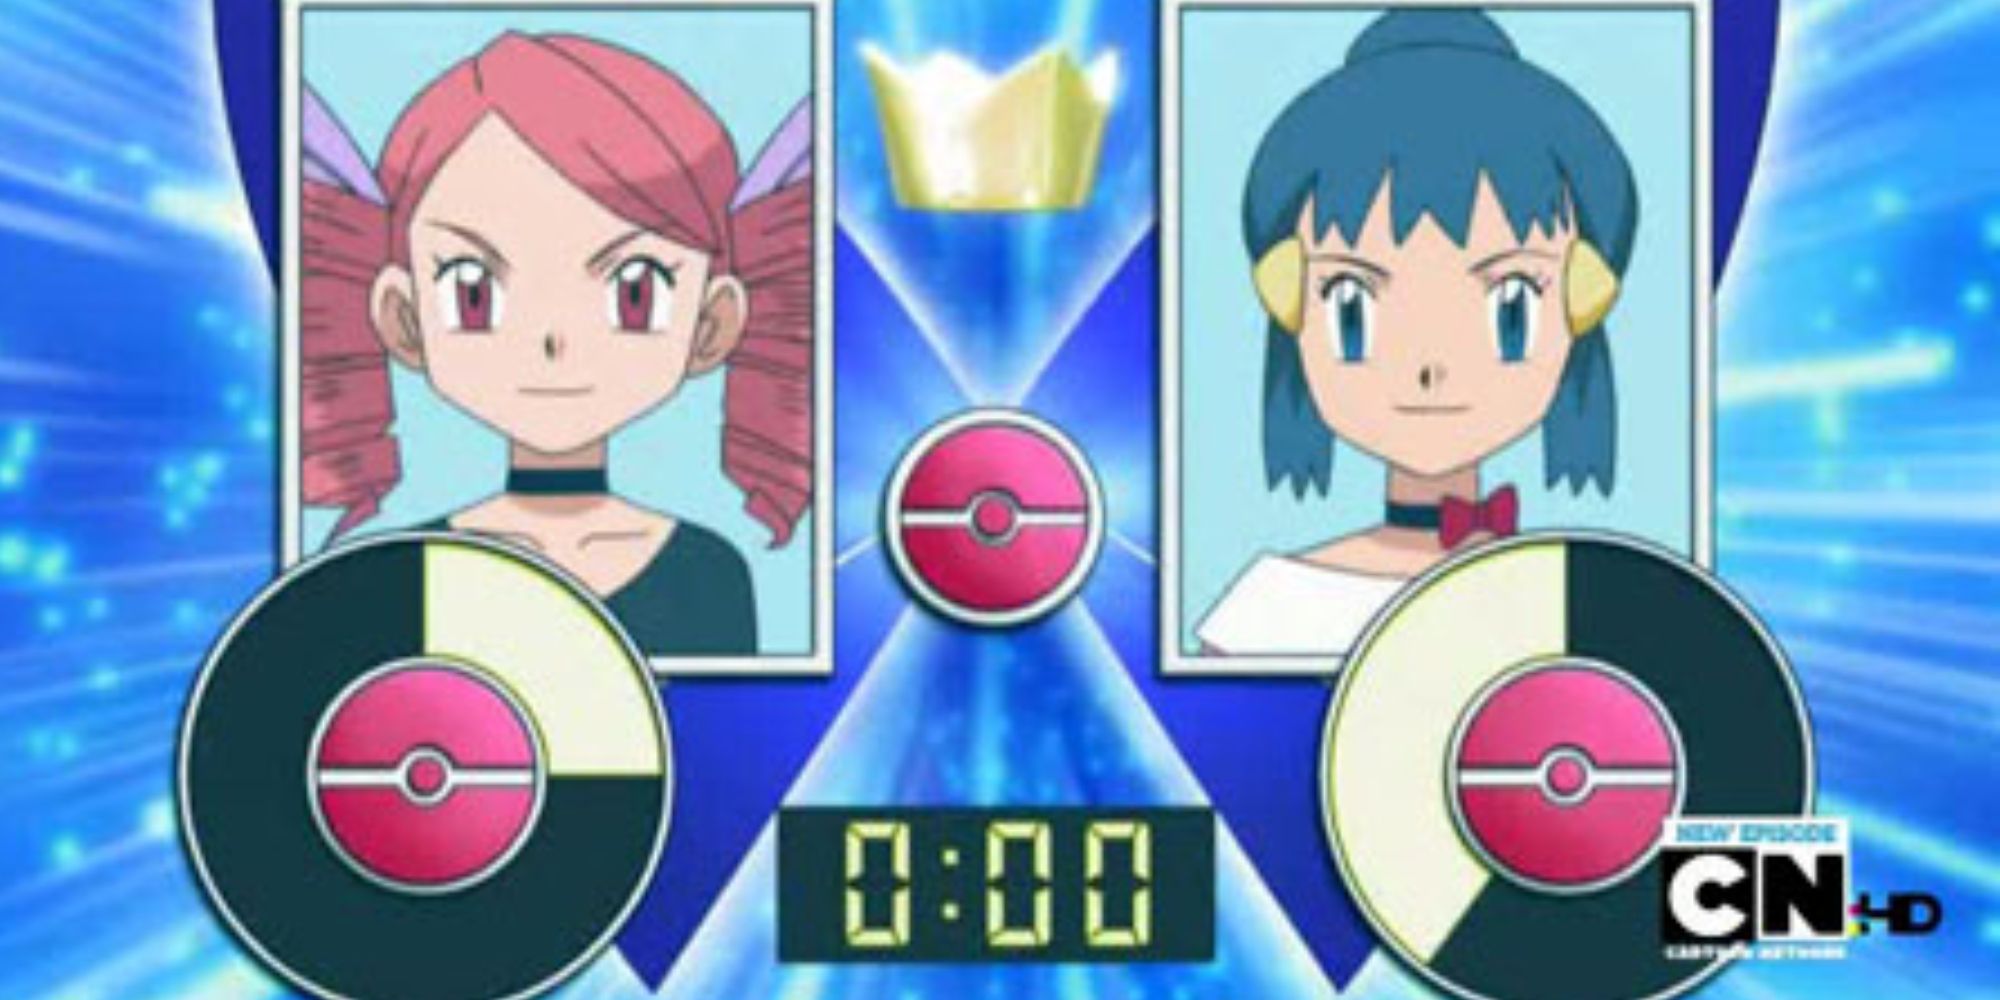 Ursula and Dawn and their scores during the Daybreak town contest